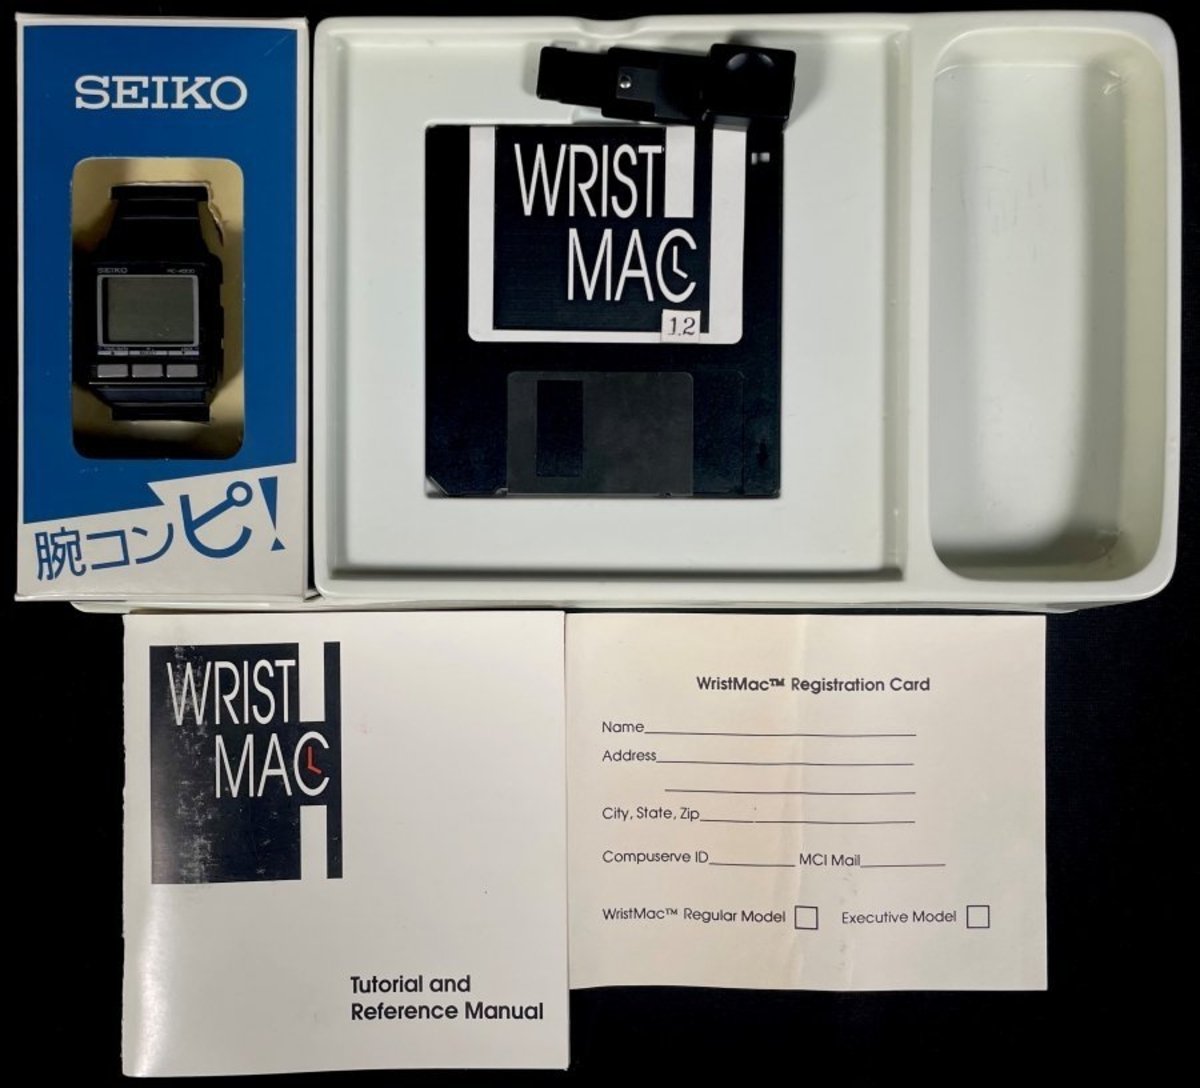 The WristMac in its original packaging